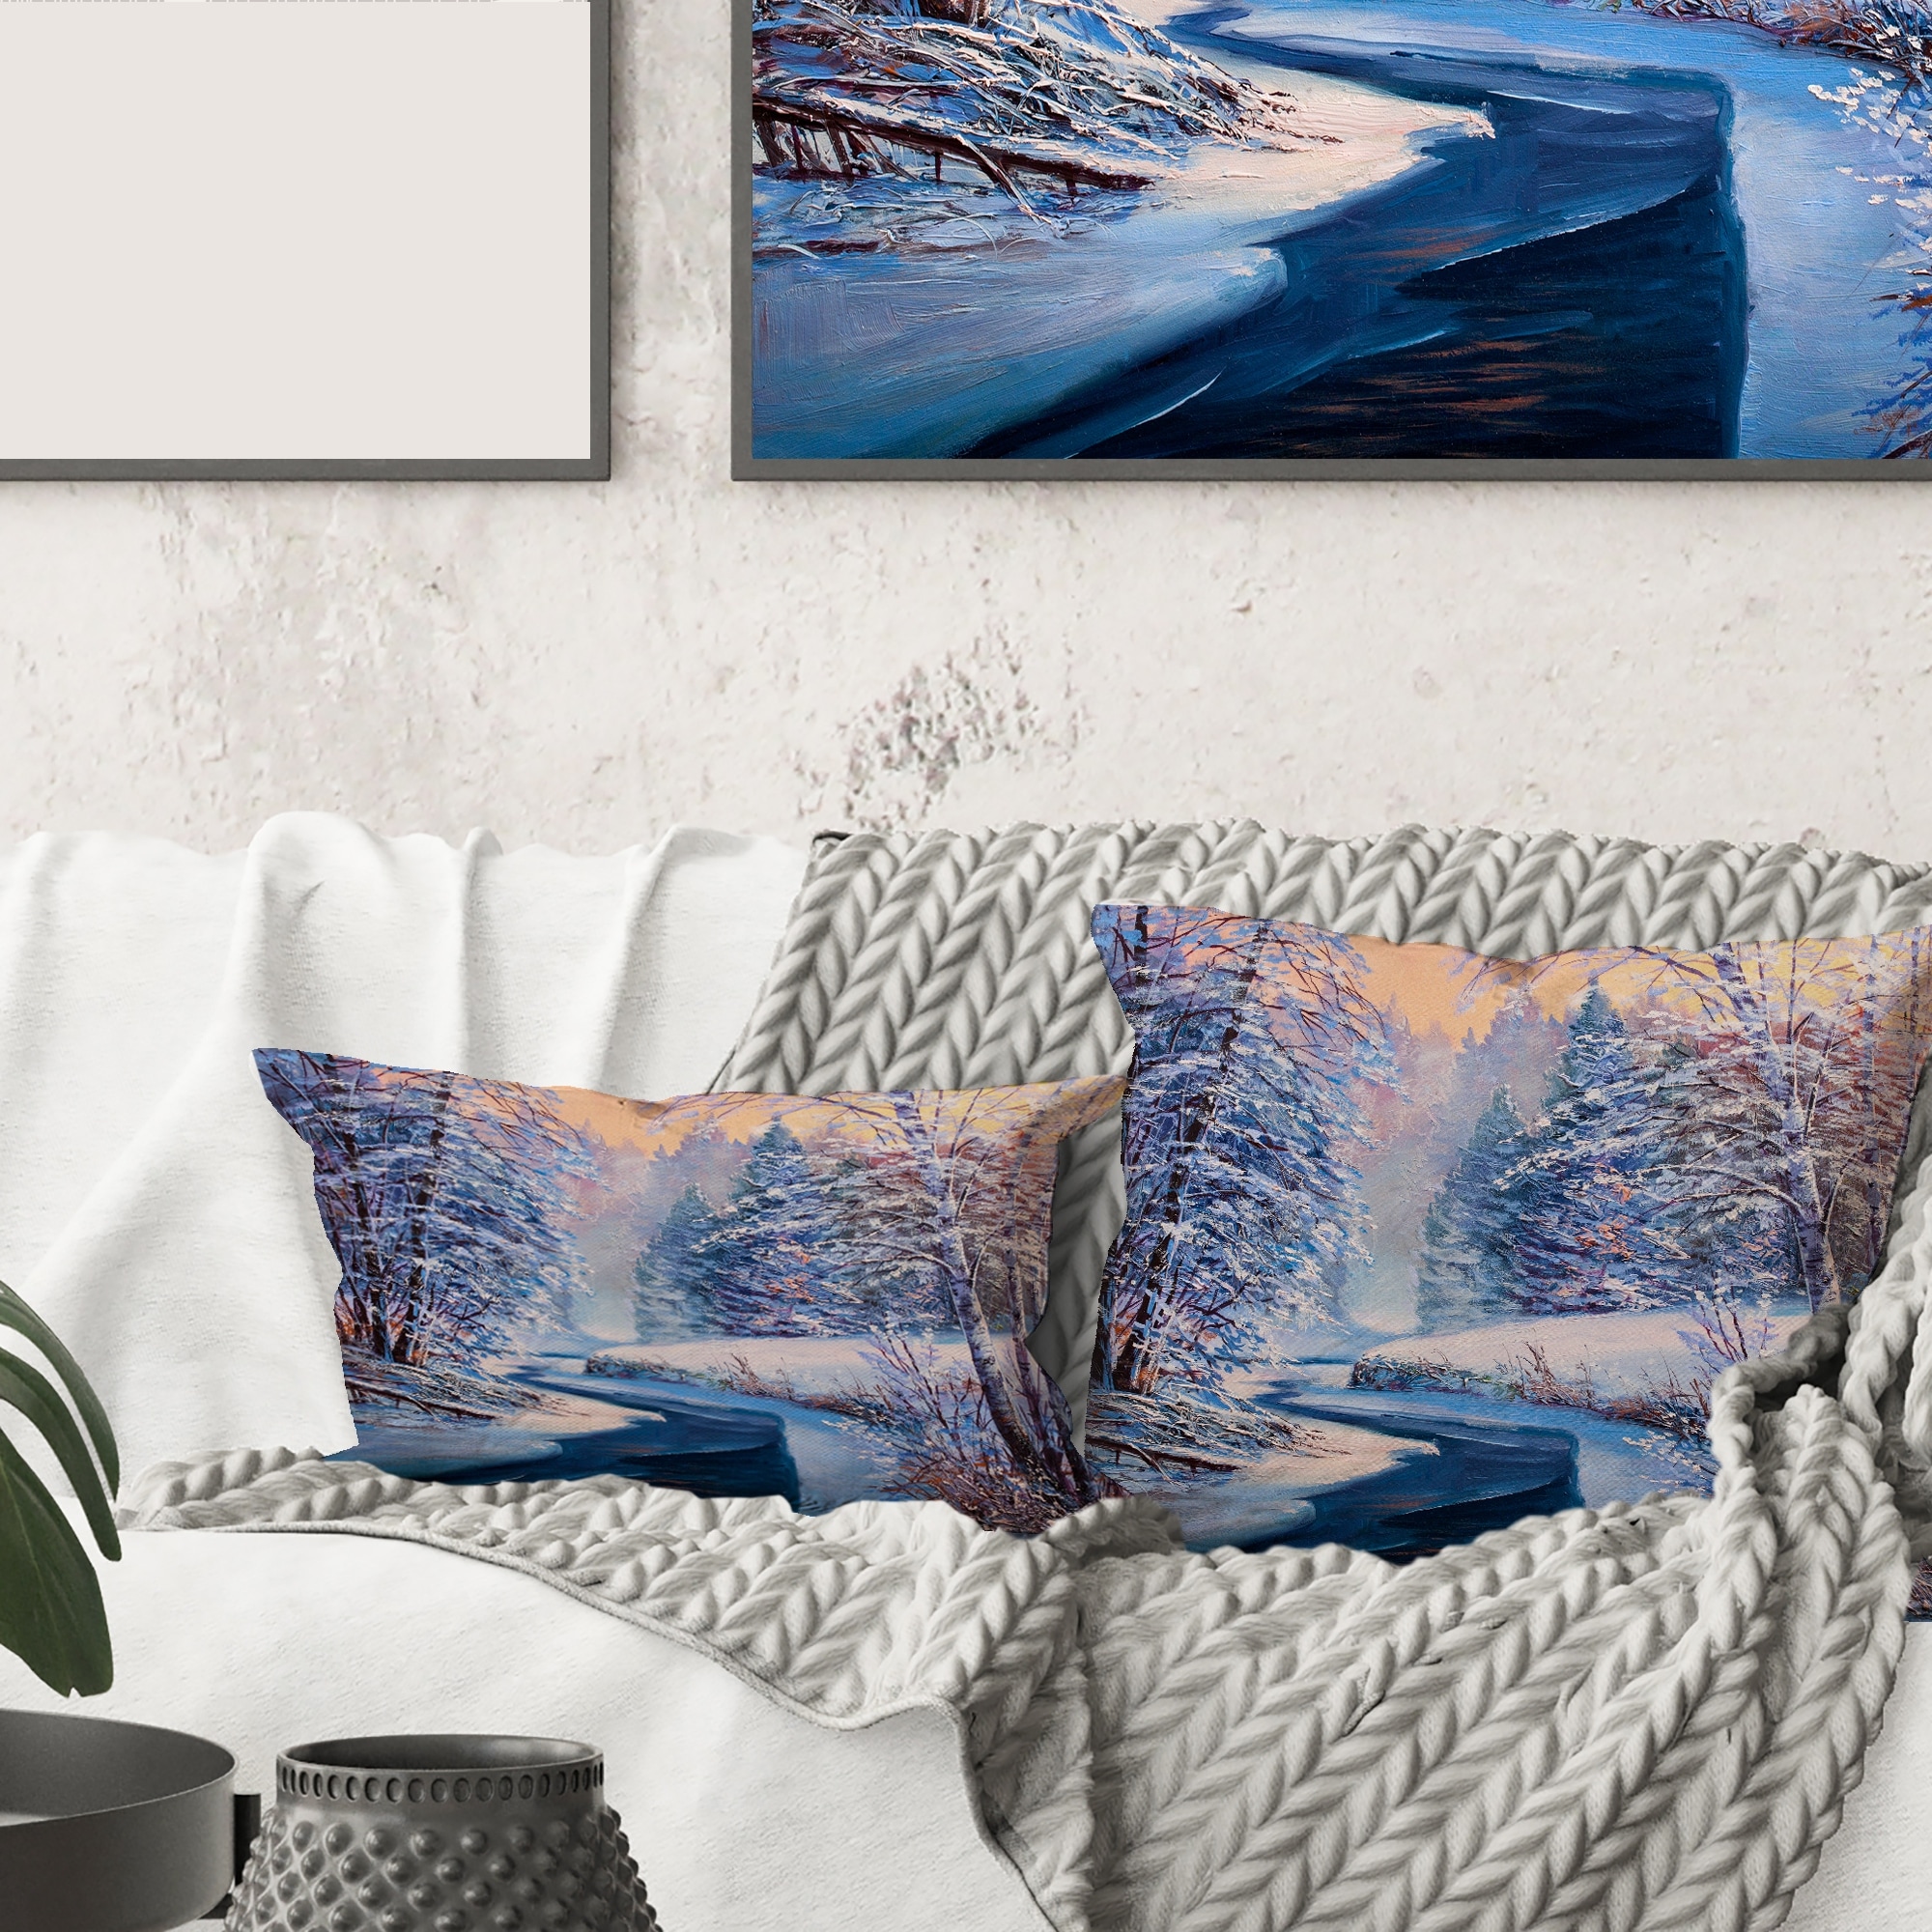 https://ak1.ostkcdn.com/images/products/is/images/direct/9019b5a789963565fec6220abe9c310c14210377/Designart-%27Pastel-Christmas-Forest-With-River%27-Lake-House-Printed-Throw-Pillow.jpg